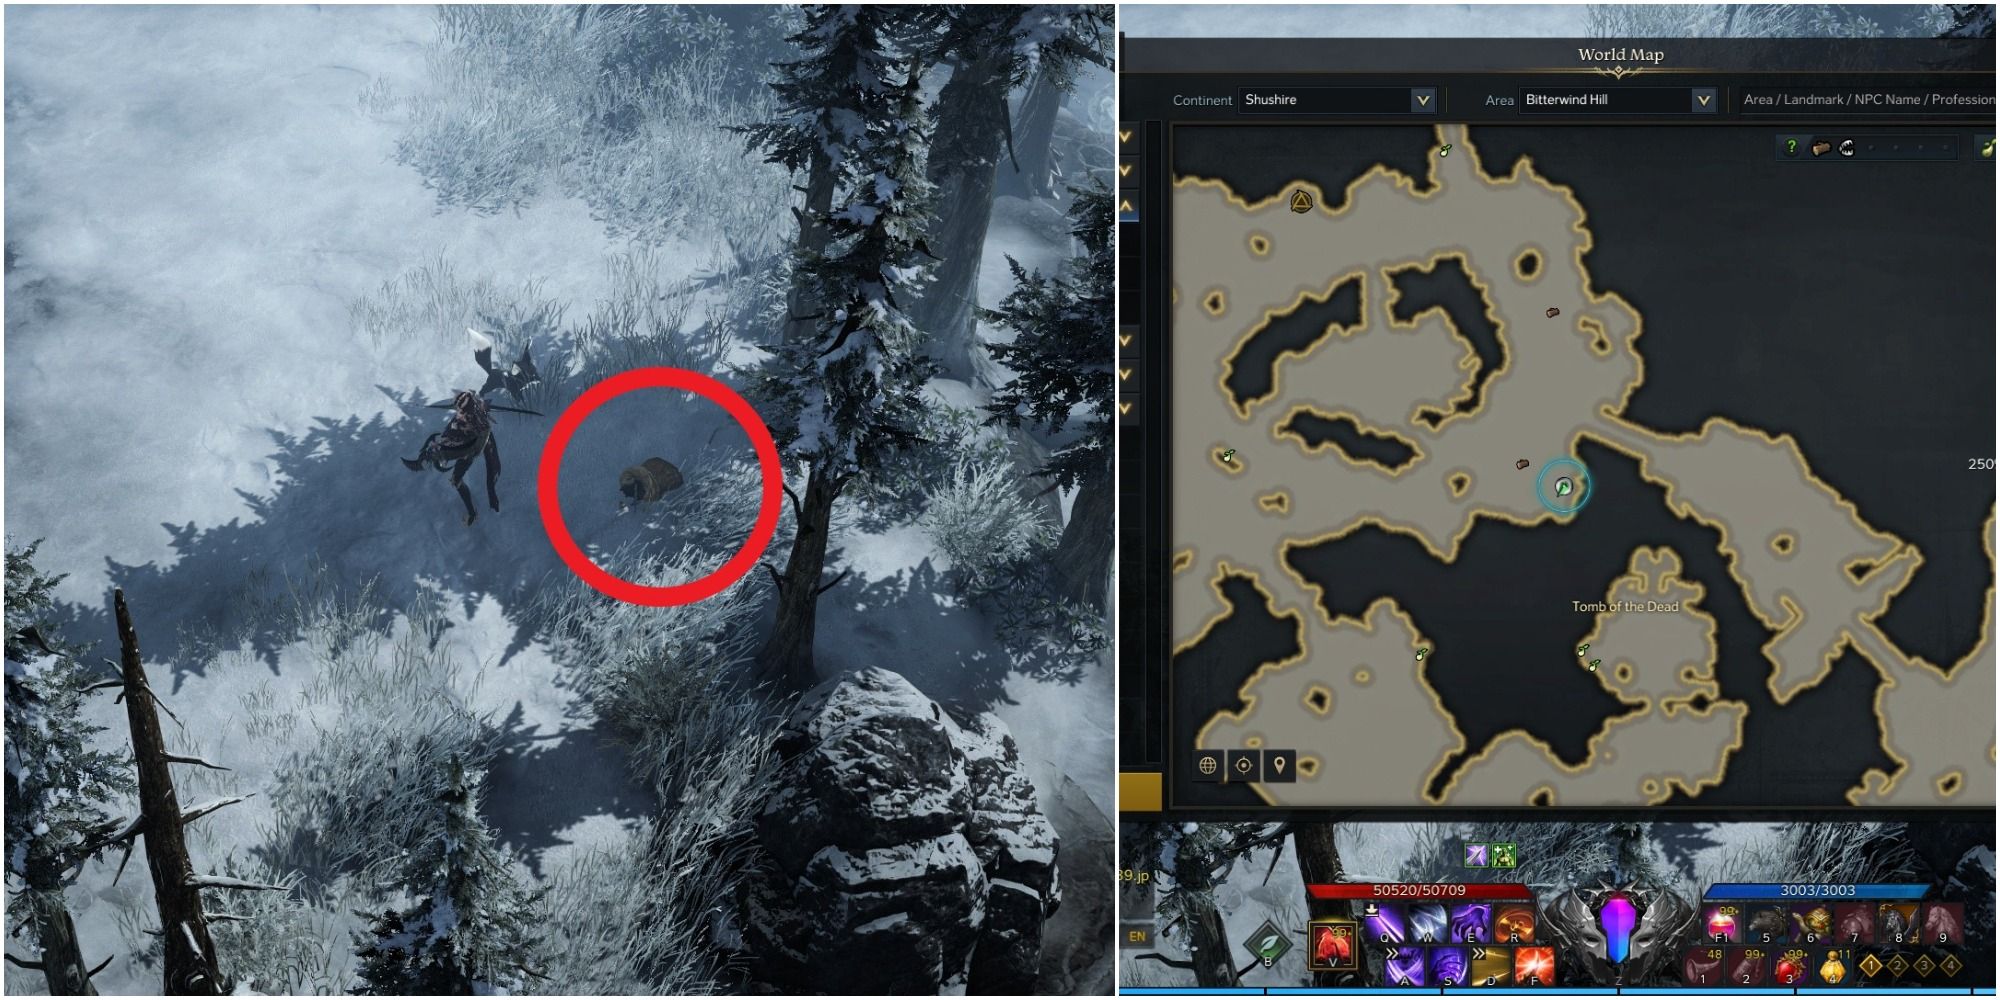 Lost Ark split image of Wolf Meat location on the map and its location on the ground with a red circle around a bag